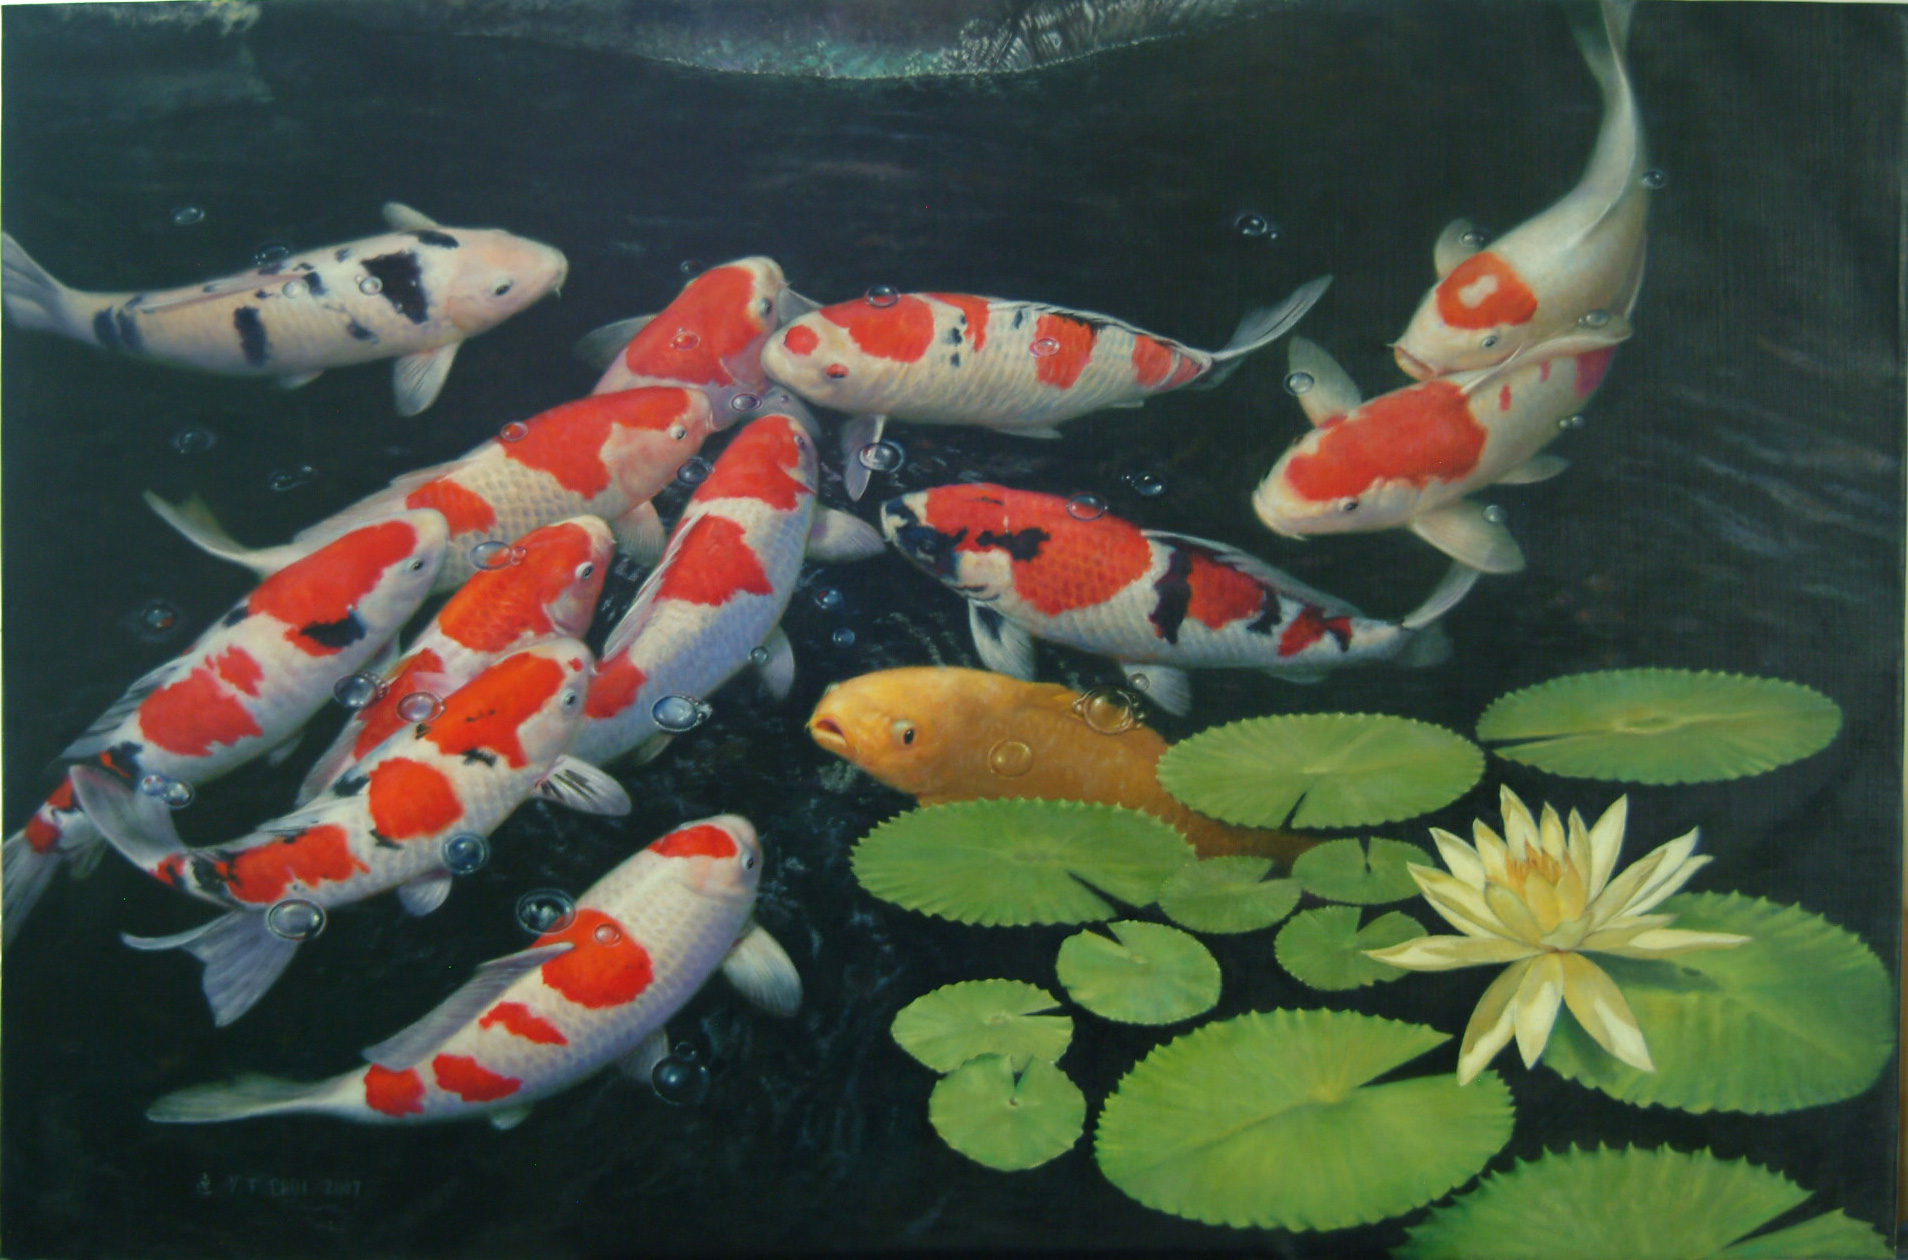 Male koi are considered sexually mature at three to five years of age